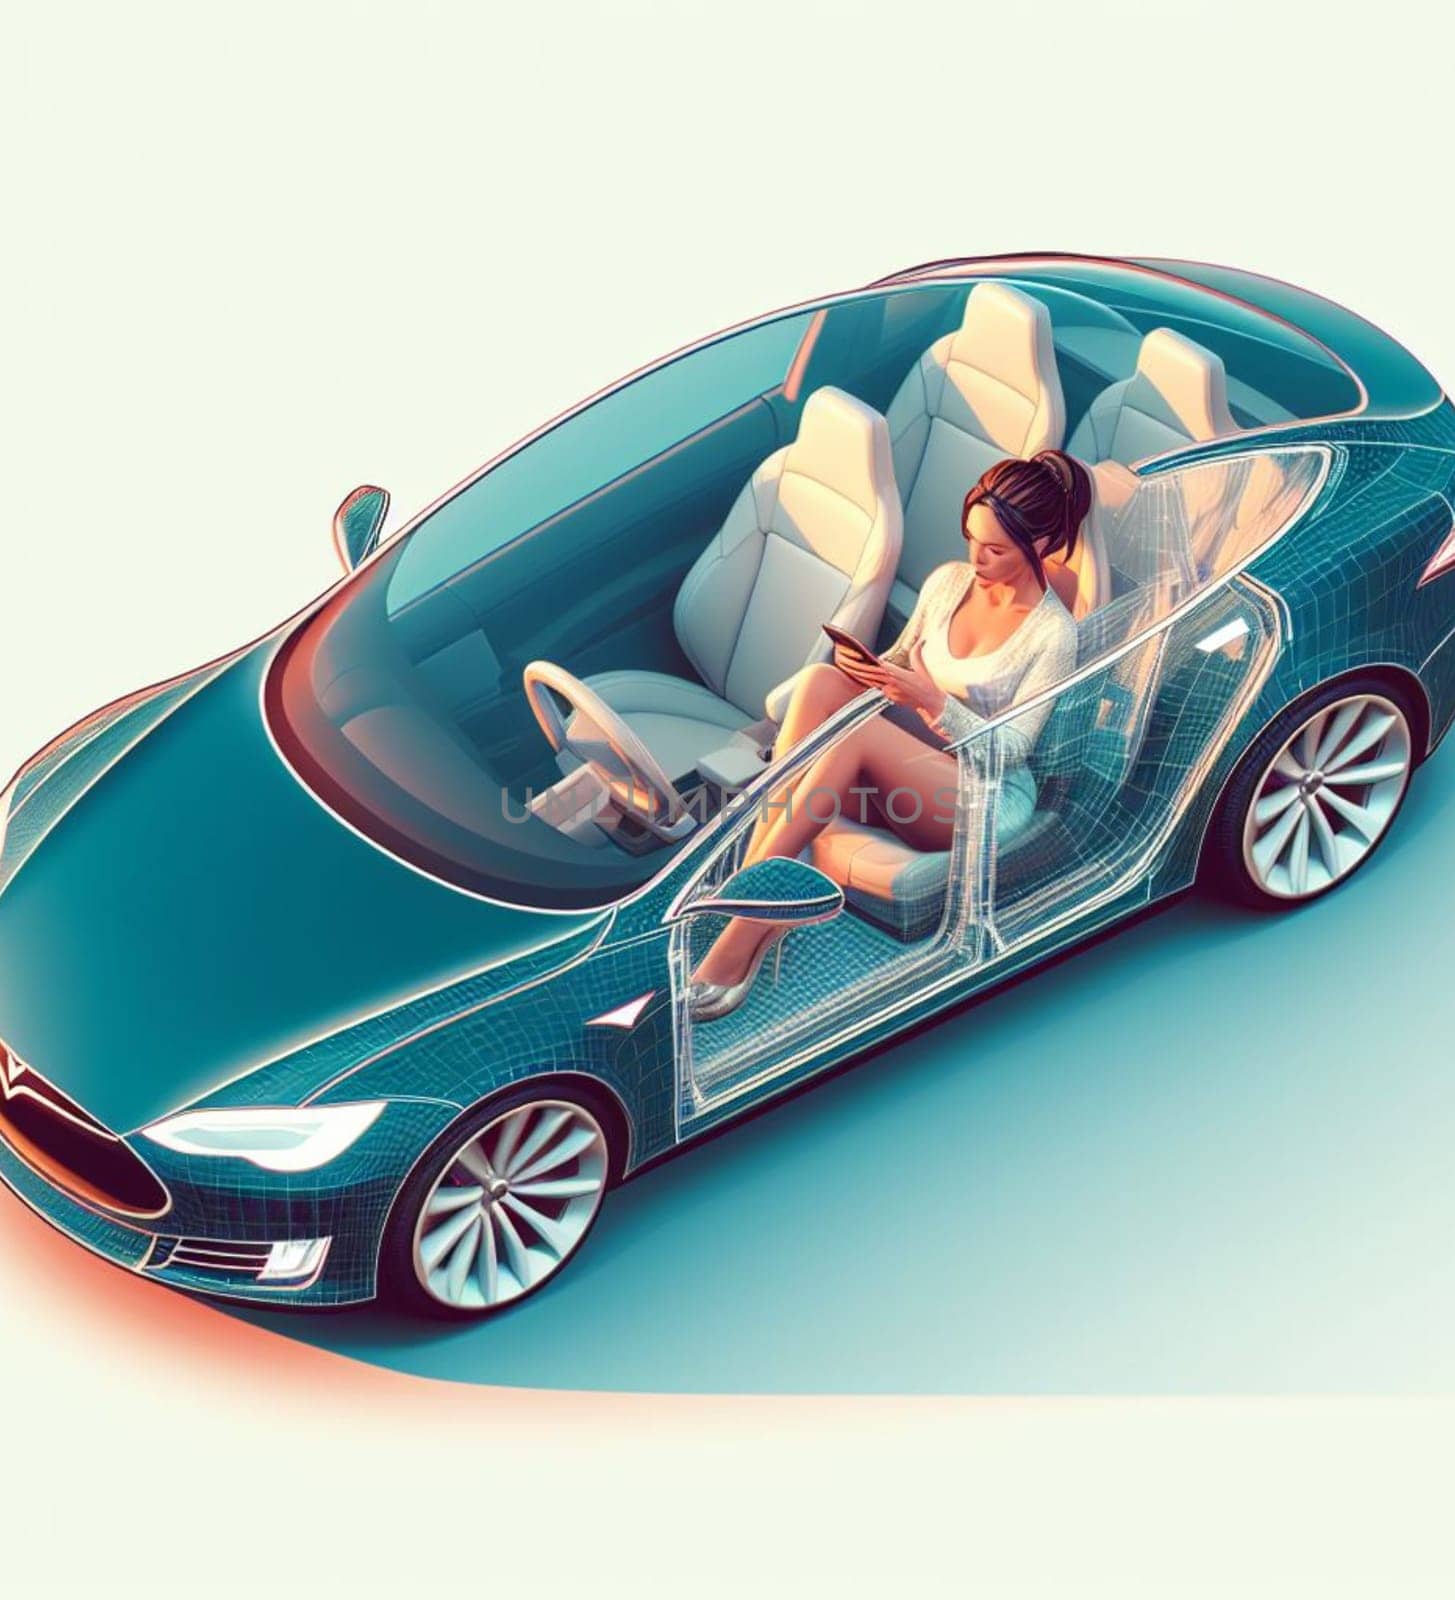 business woman manager remote working from autonomous driving ev car traveling fast in city traffic by verbano